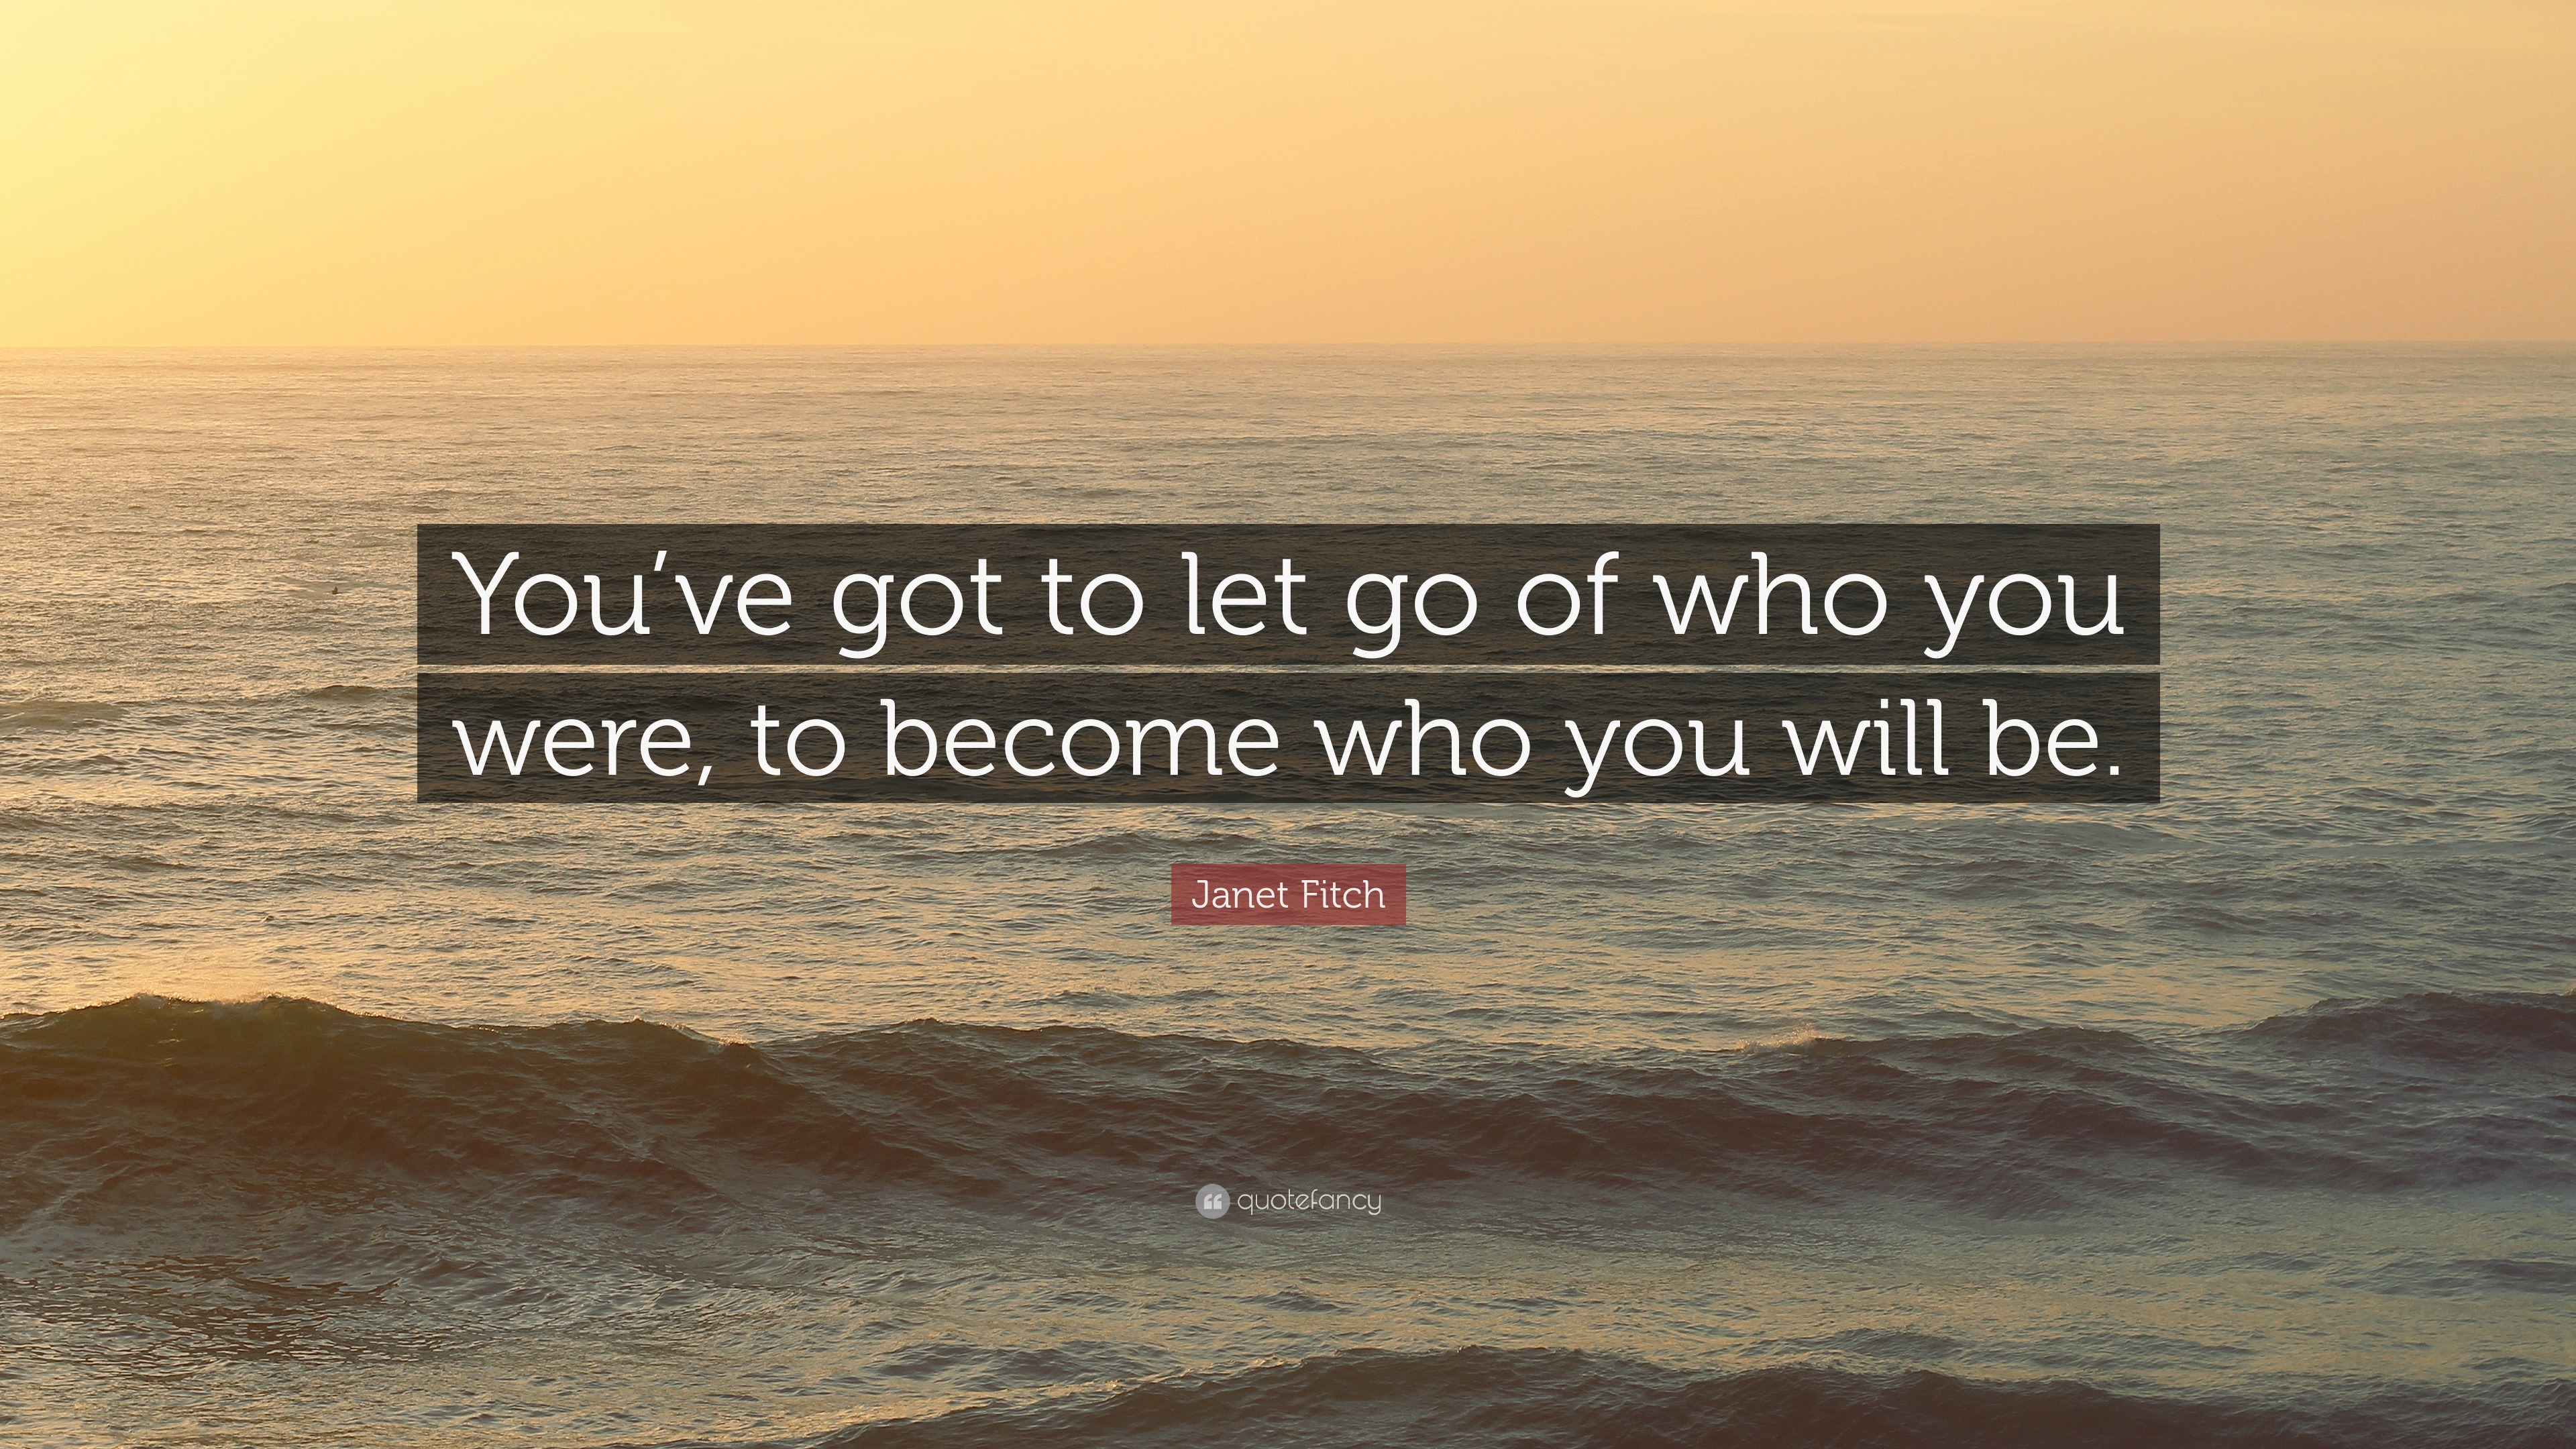 Janet Fitch Quote: “You’ve got to let go of who you were, to become who ...